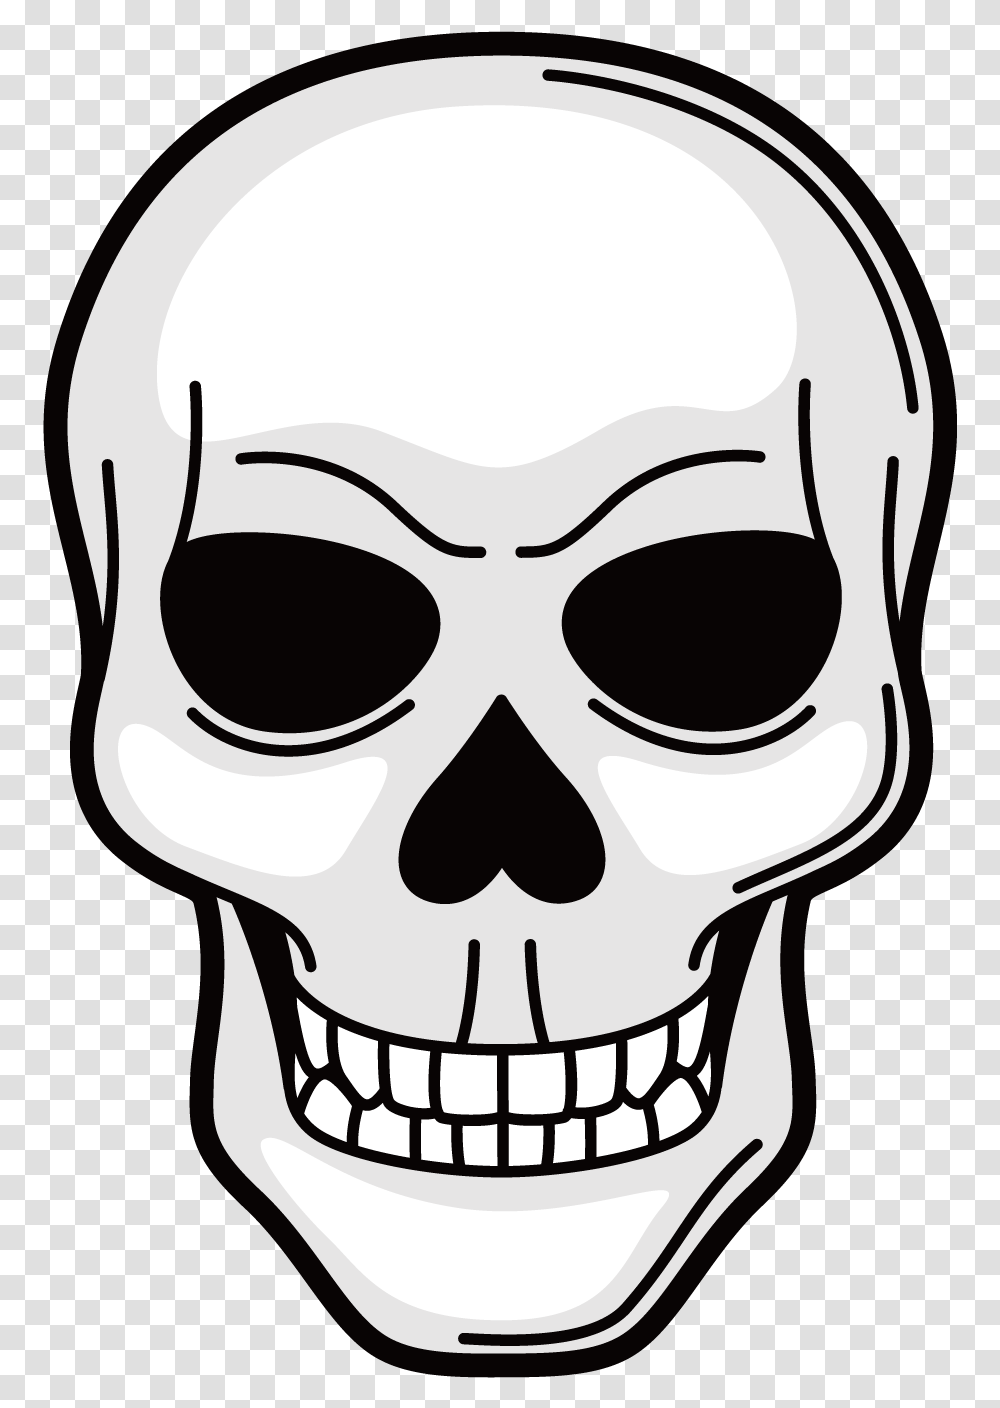 Symbol Tattoo Royalty Free Illustration Clip Art Black And White Skull, Sunglasses, Accessories, Accessory, Head Transparent Png